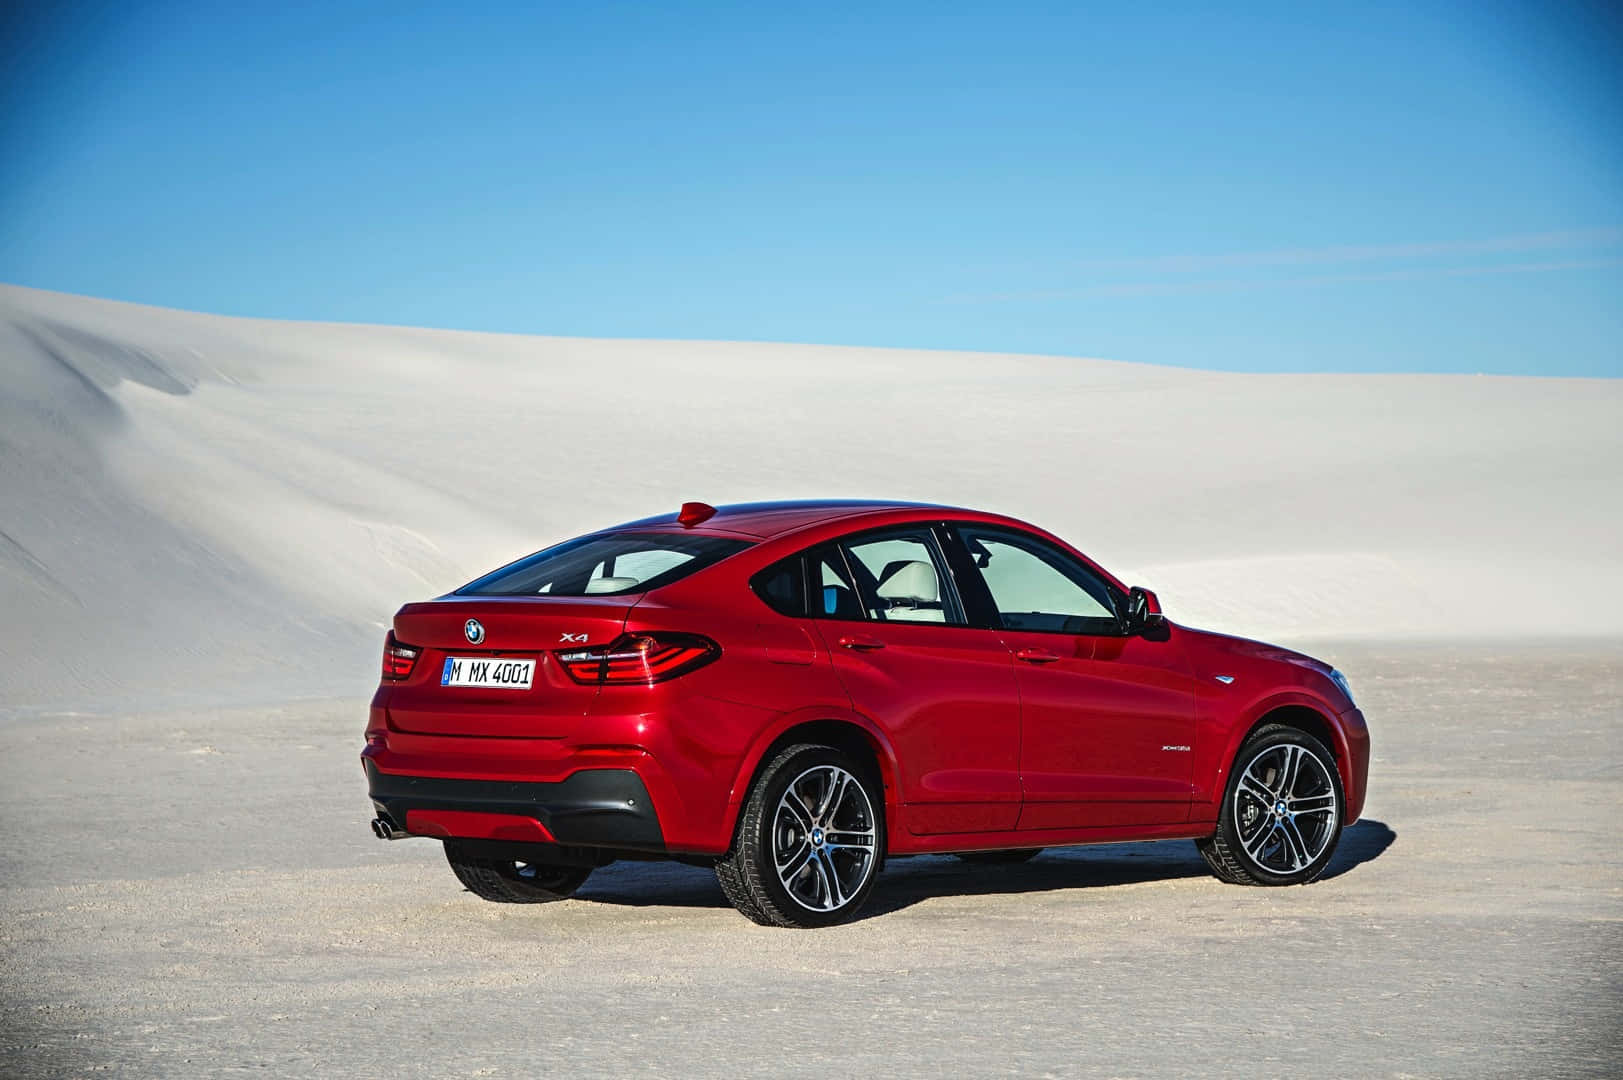 Sleek and Stylish BMW X4 in Motion Wallpaper